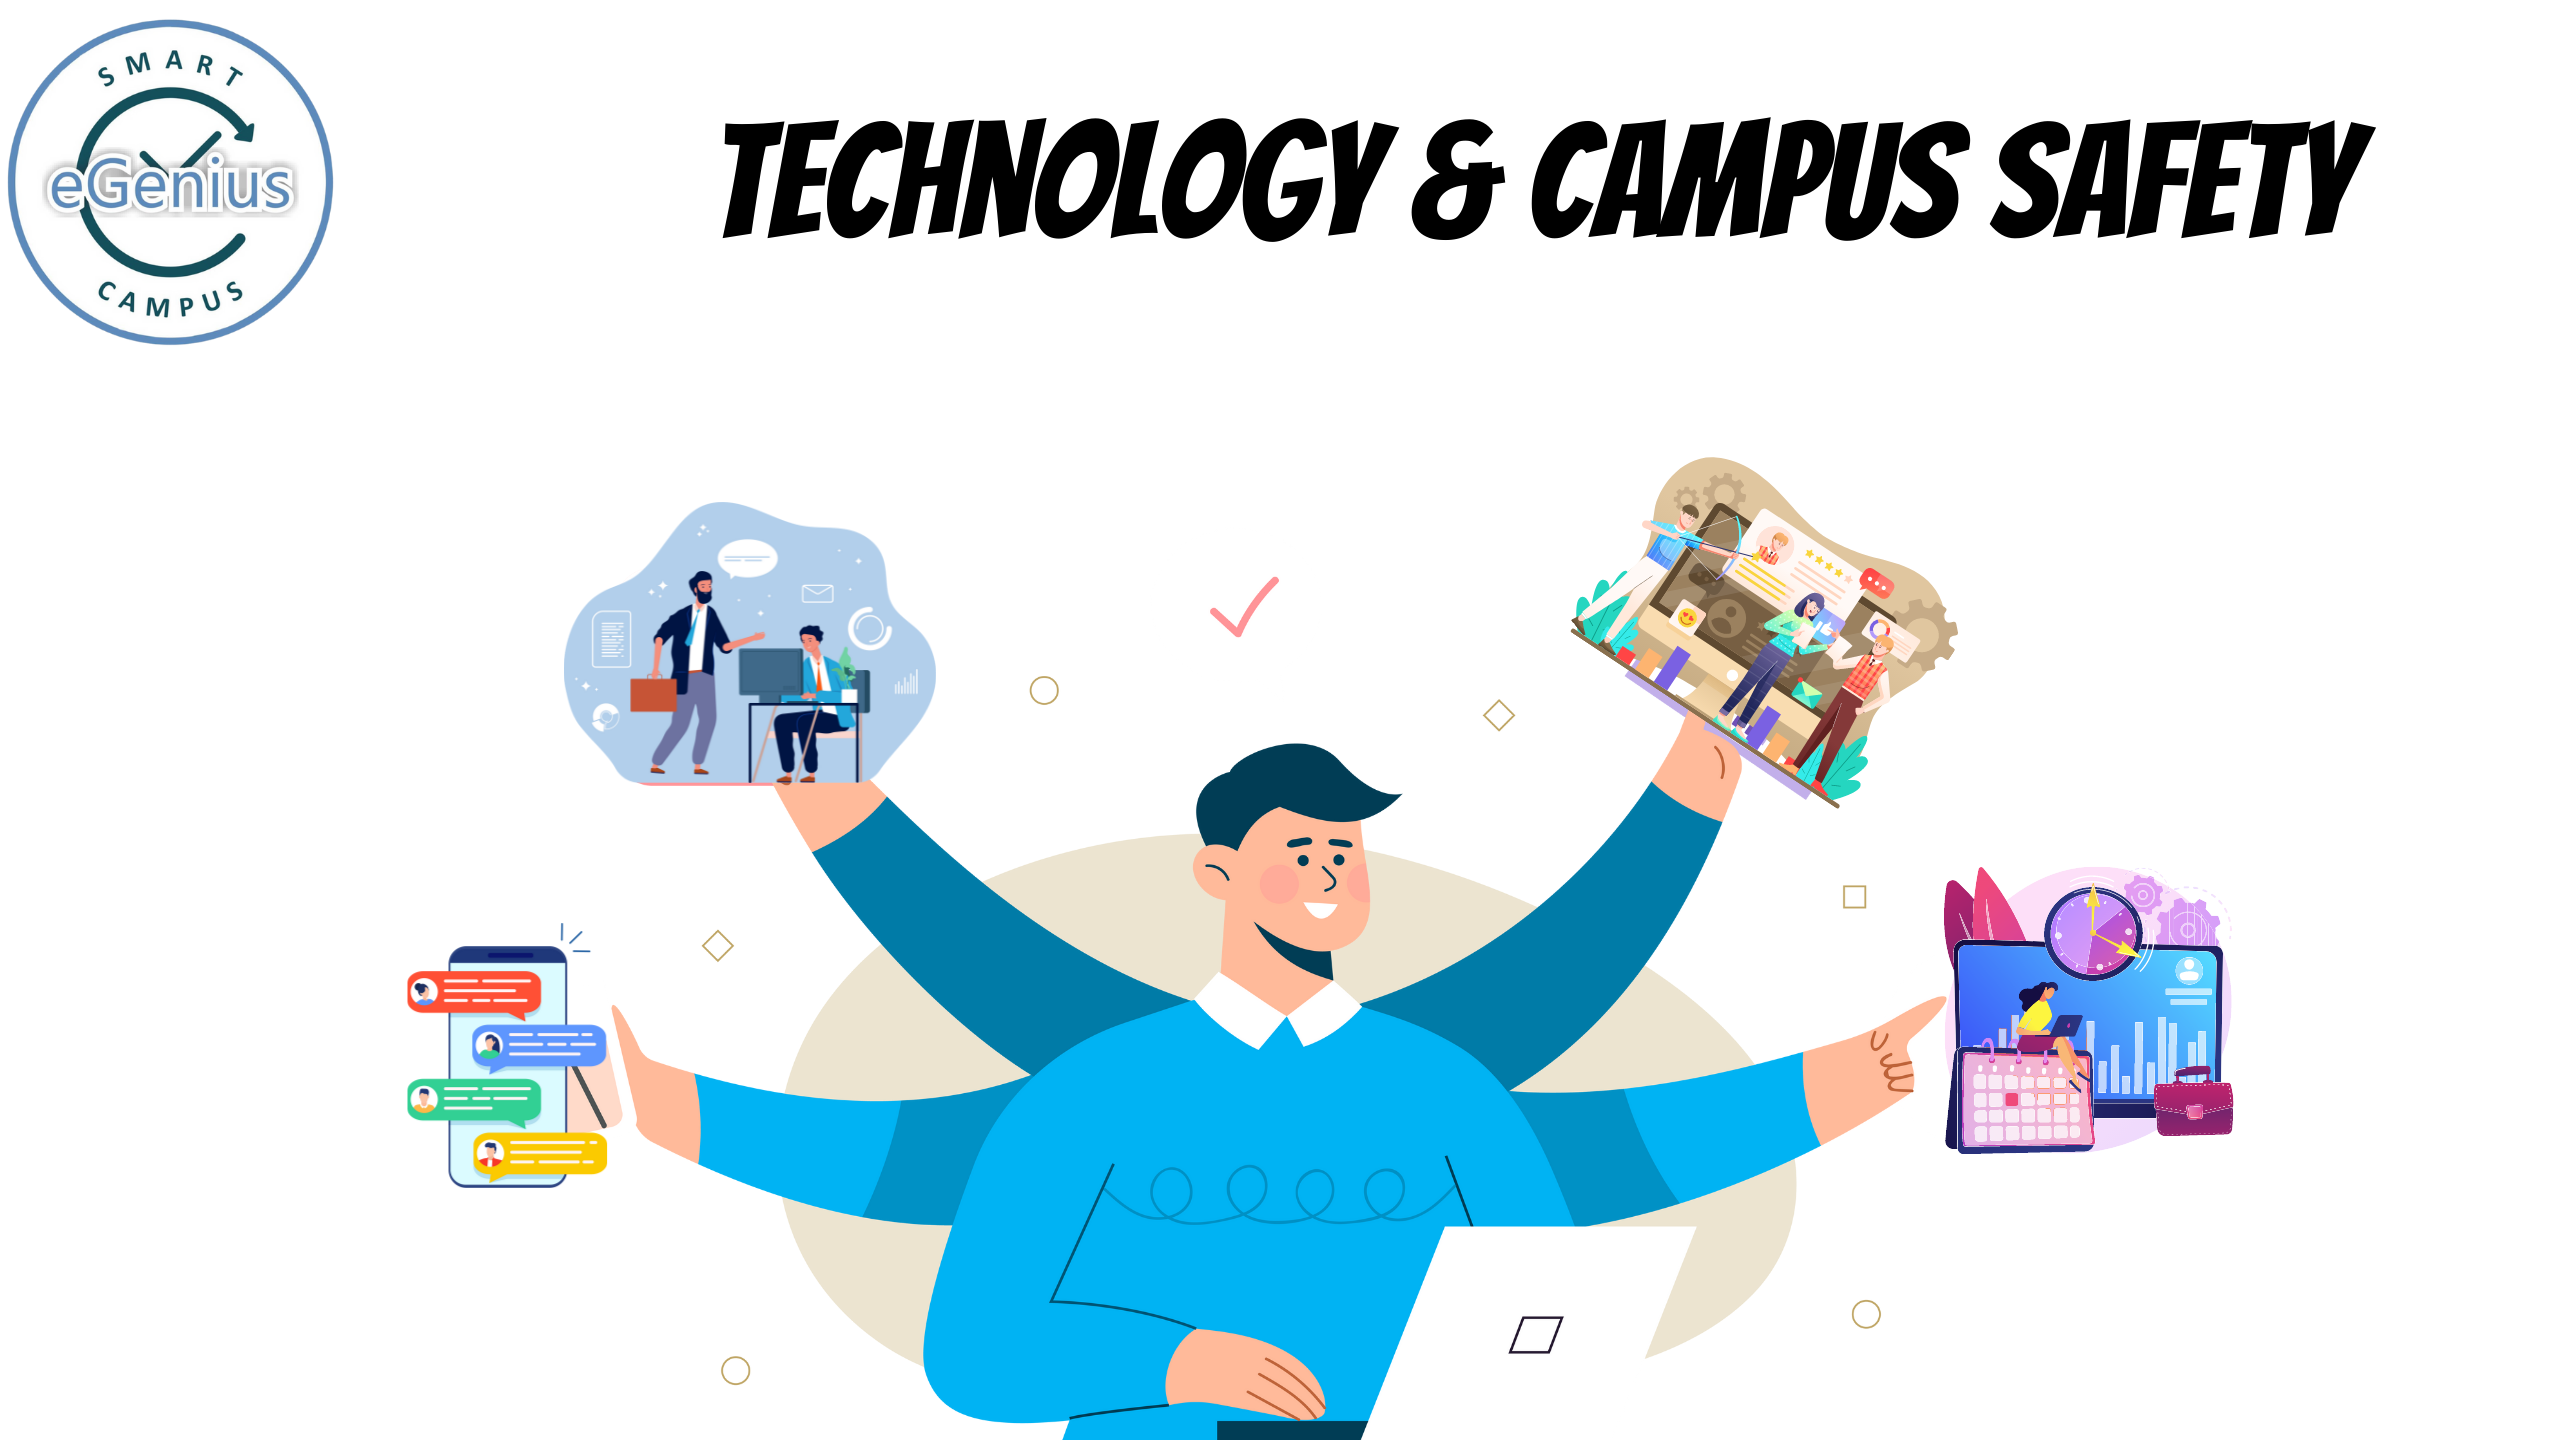 Technology and Campus Safety by eGenius